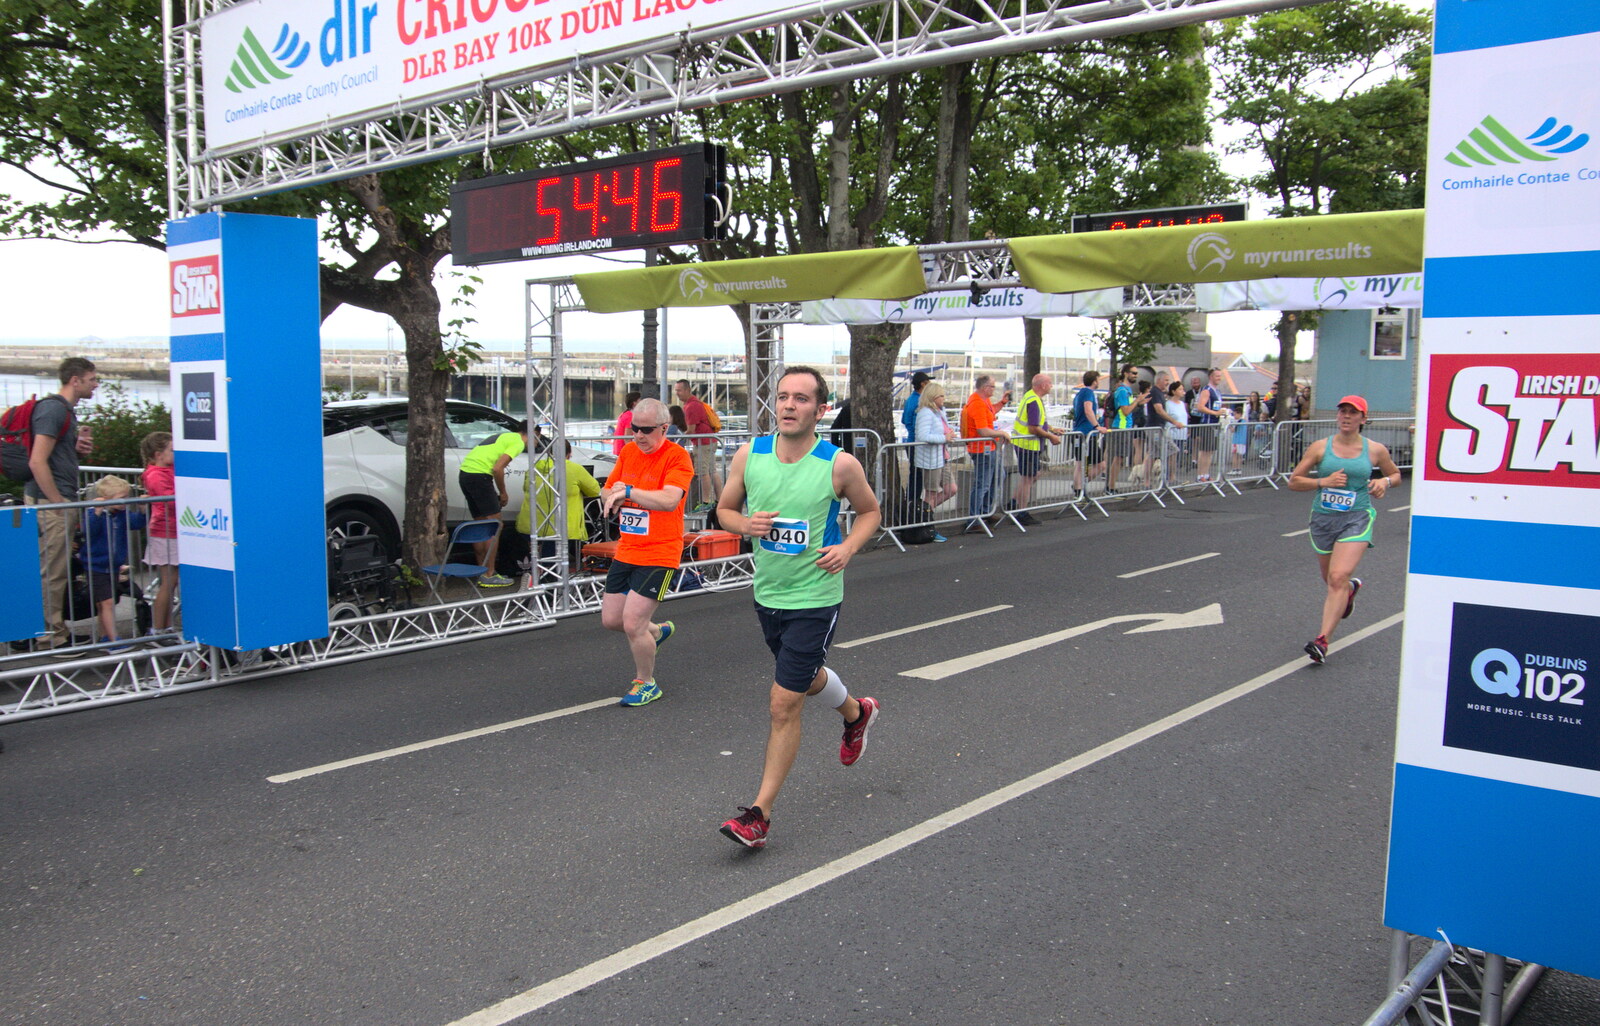 James crosses the line from The Dún Laoghaire 10k Run, County Dublin, Ireland - 6th August 2018